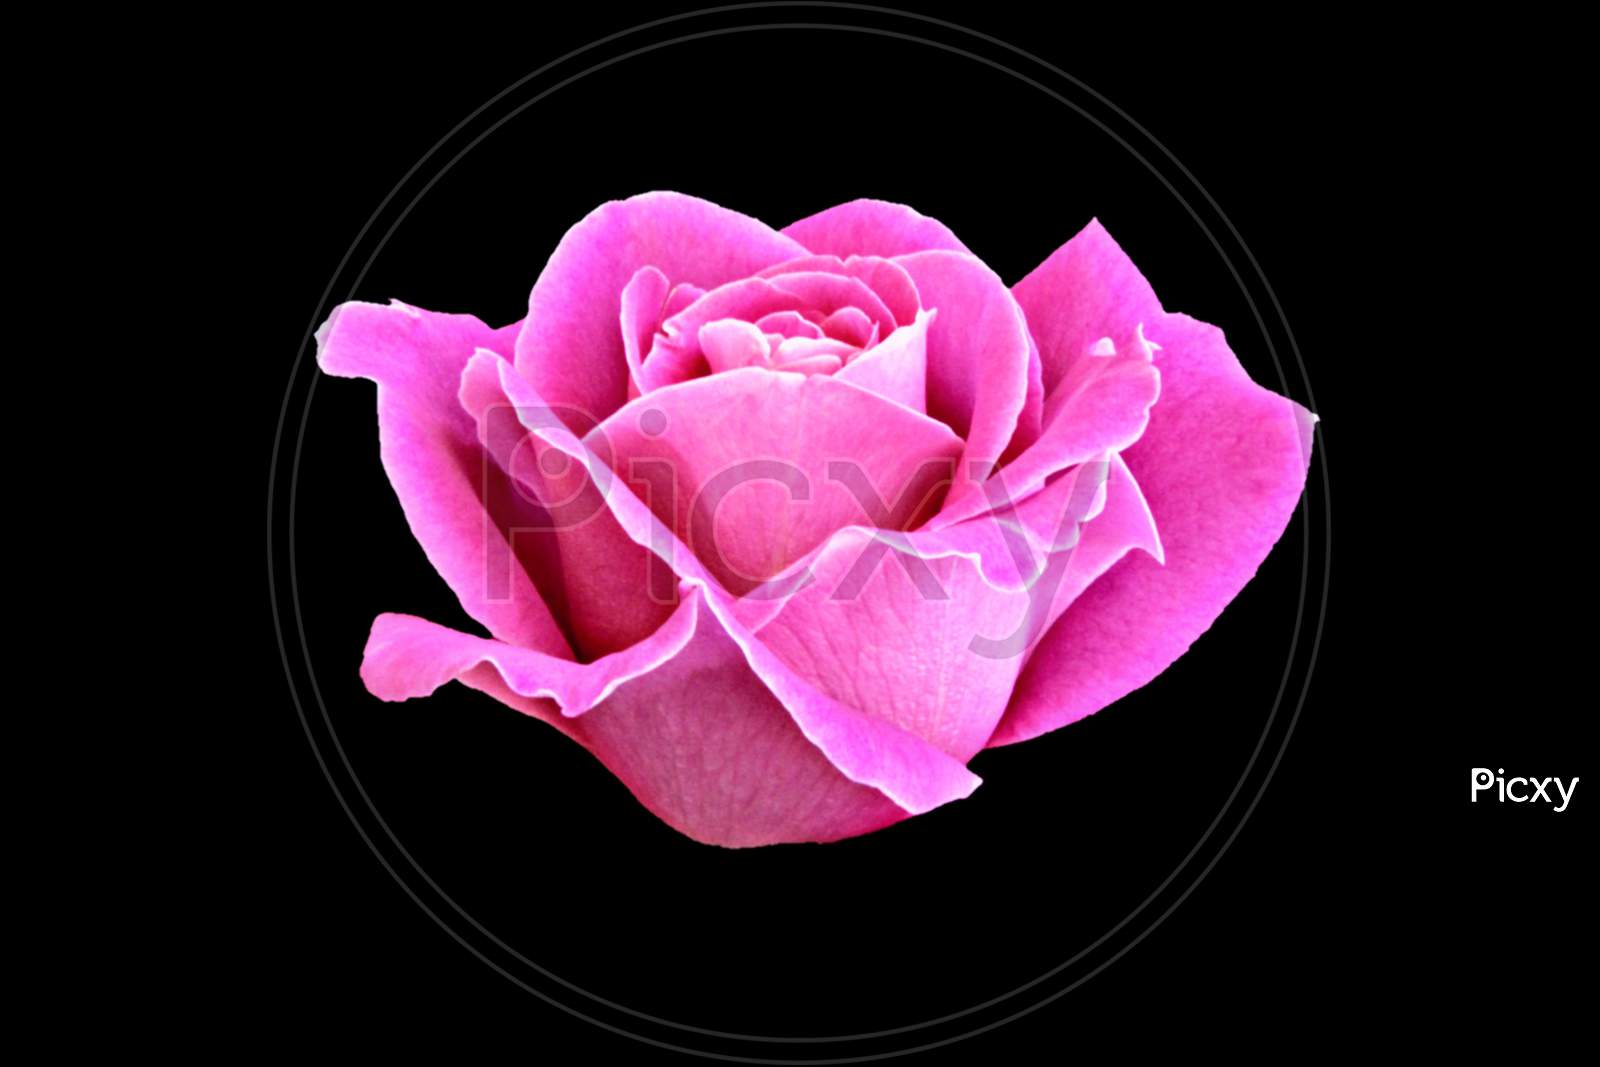 Fresh pink rose isolated on a black background.